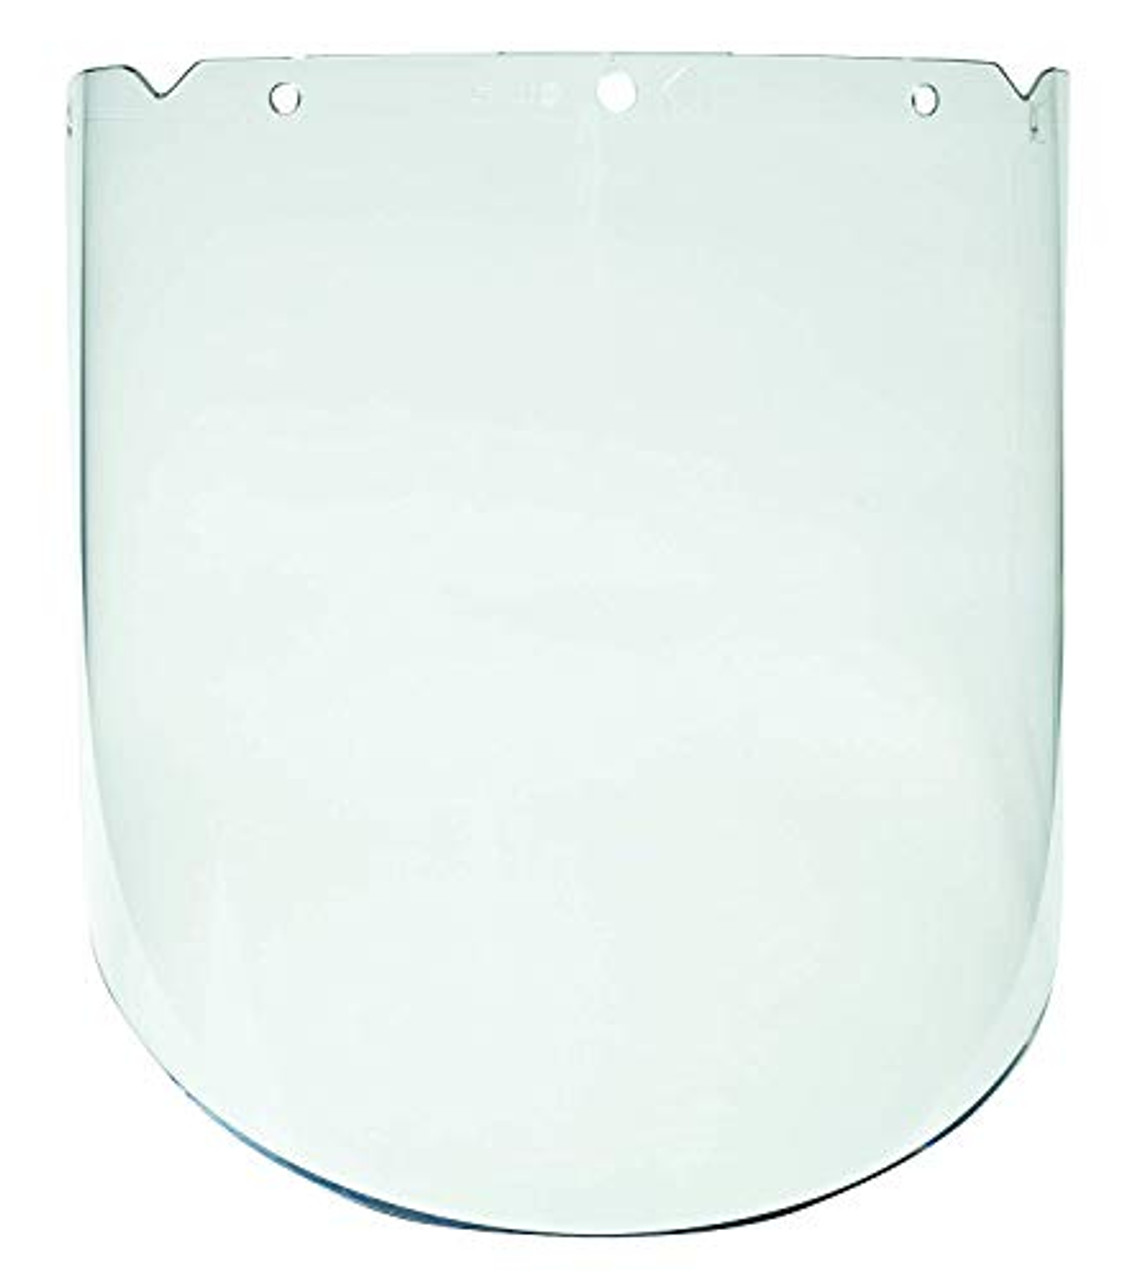 MSA 10115844 V-Gard Visor - Elevated Temperature, Polycarbonate (PC), Clear Tint with Antifog/Antiscratch Coating, Molded, 9.25" x 17" x 0.098", Heavy Duty, Replaceable Eye Protection for Hard Hat